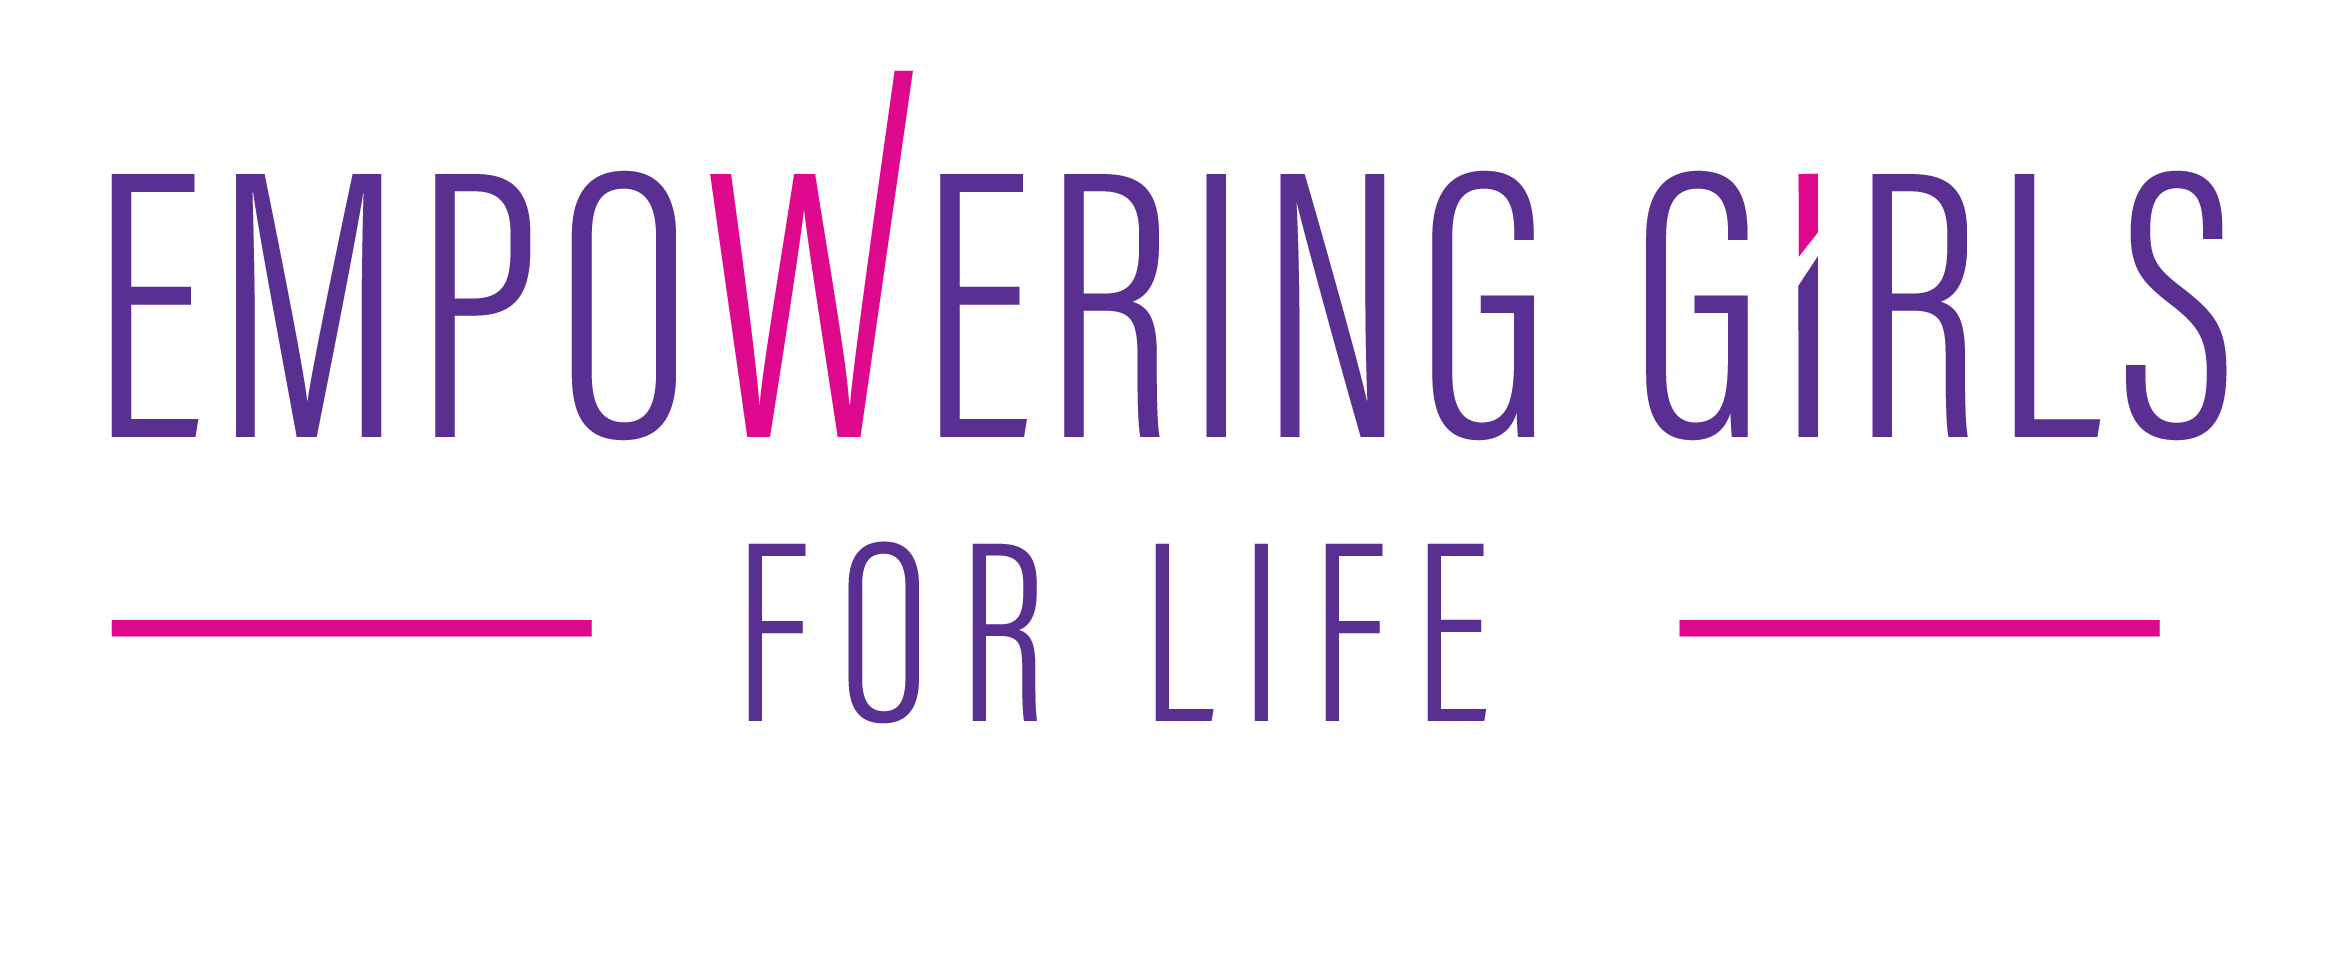 Empowering Girls for Life